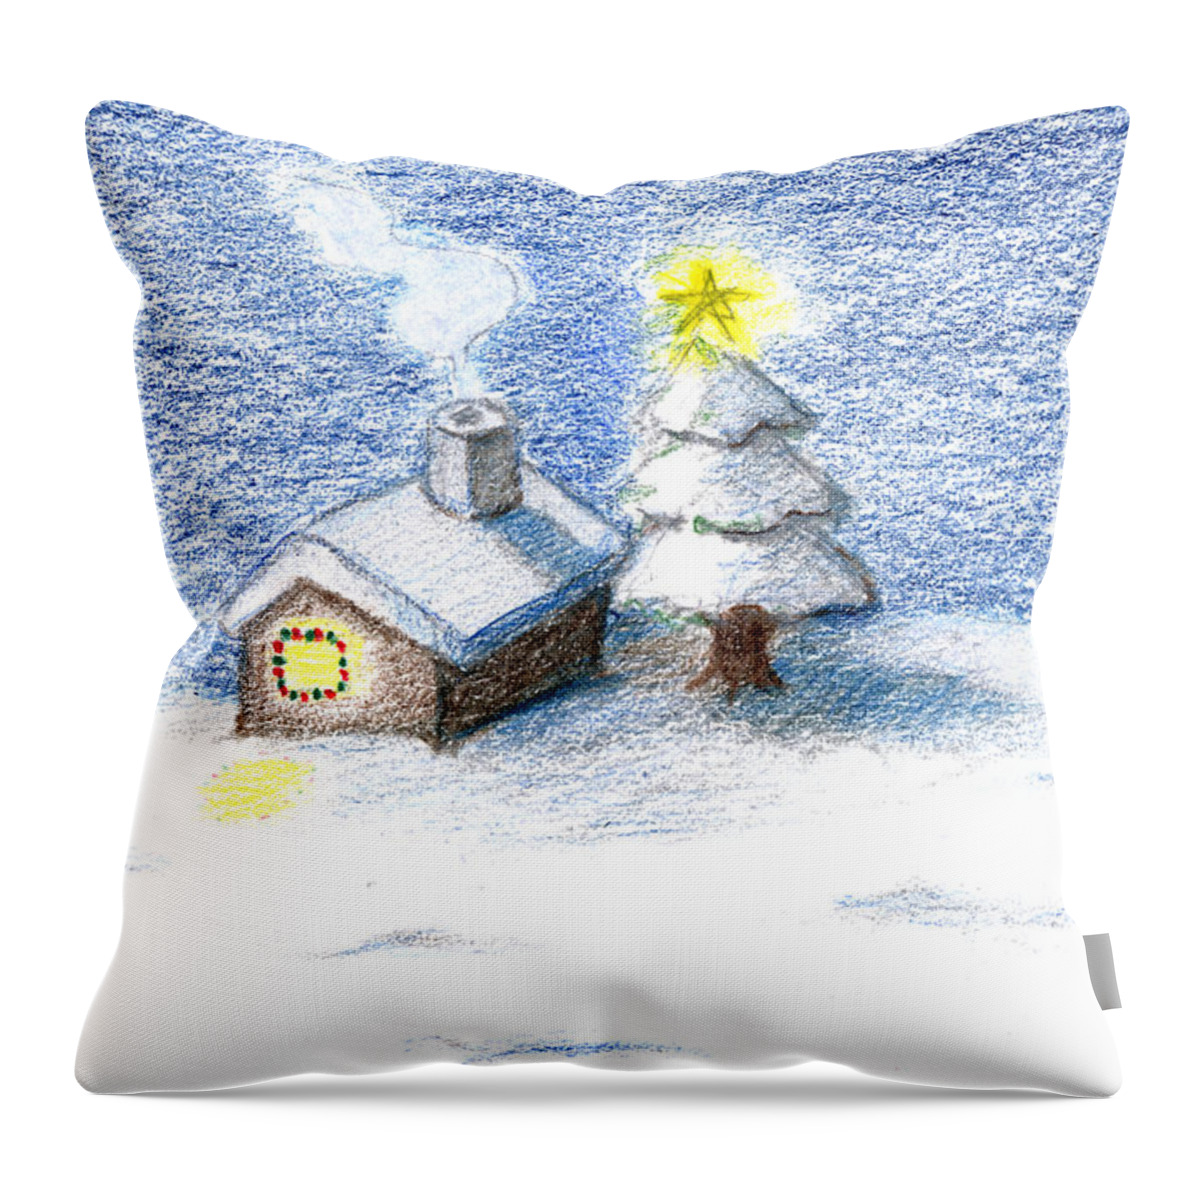 Silent Night Throw Pillow featuring the drawing Silent Night by Keiko Katsuta